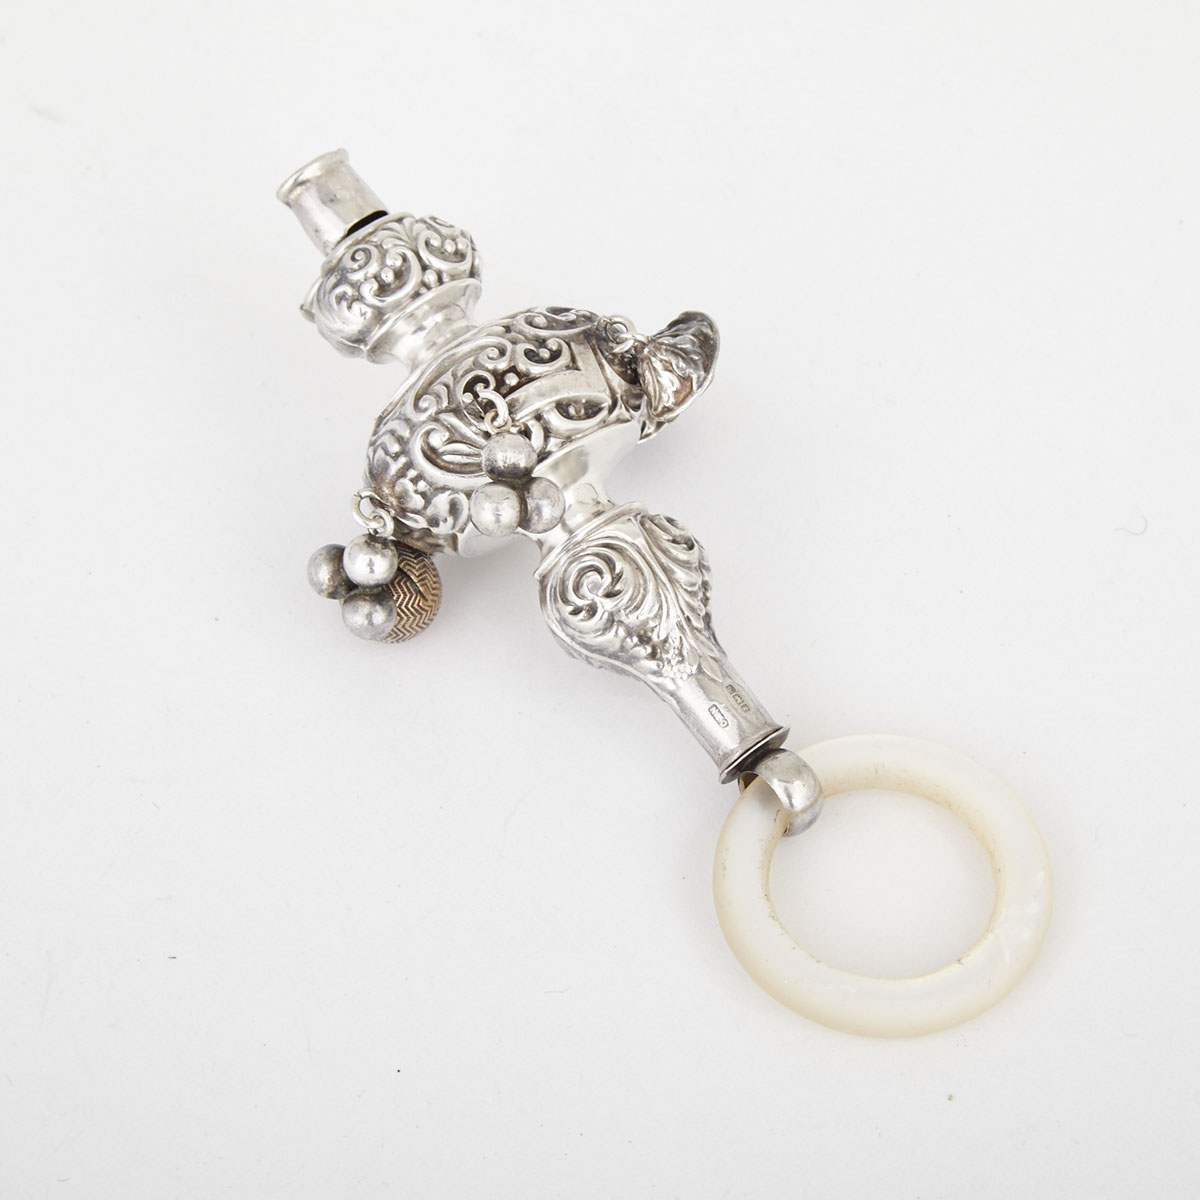 Edwardian Silver Child’s Rattle and Whistle, Crisford & Norris, Birmingham, 1905